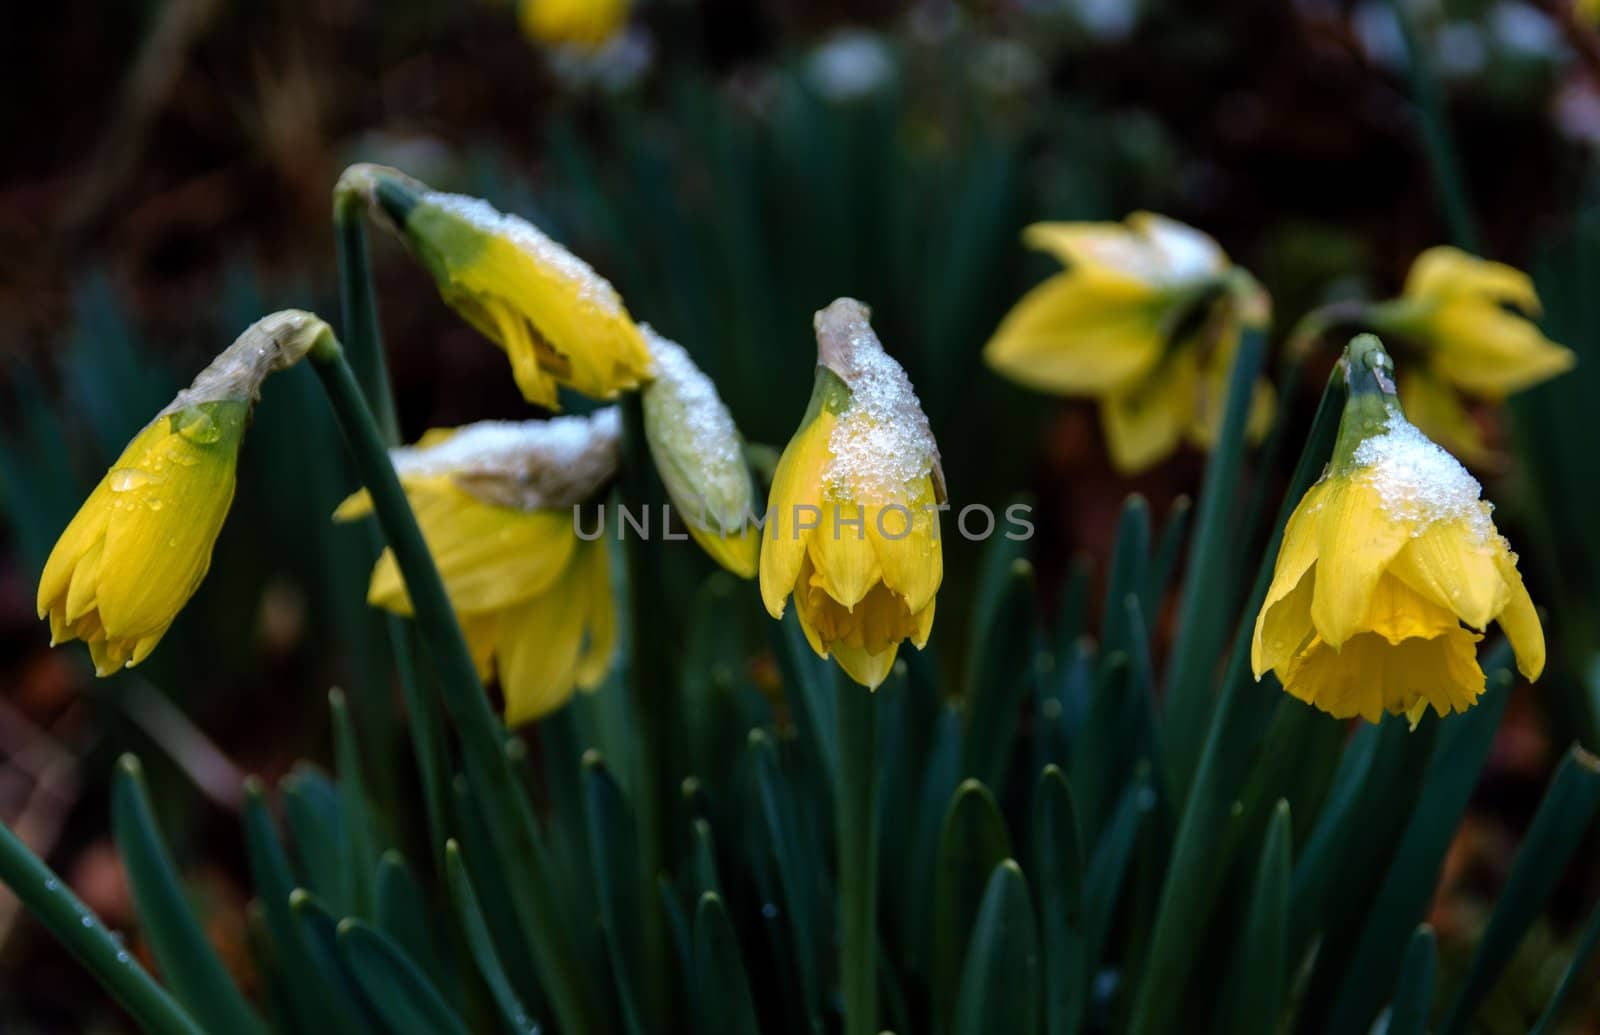 Early dafodil flowers coated with snow and ice